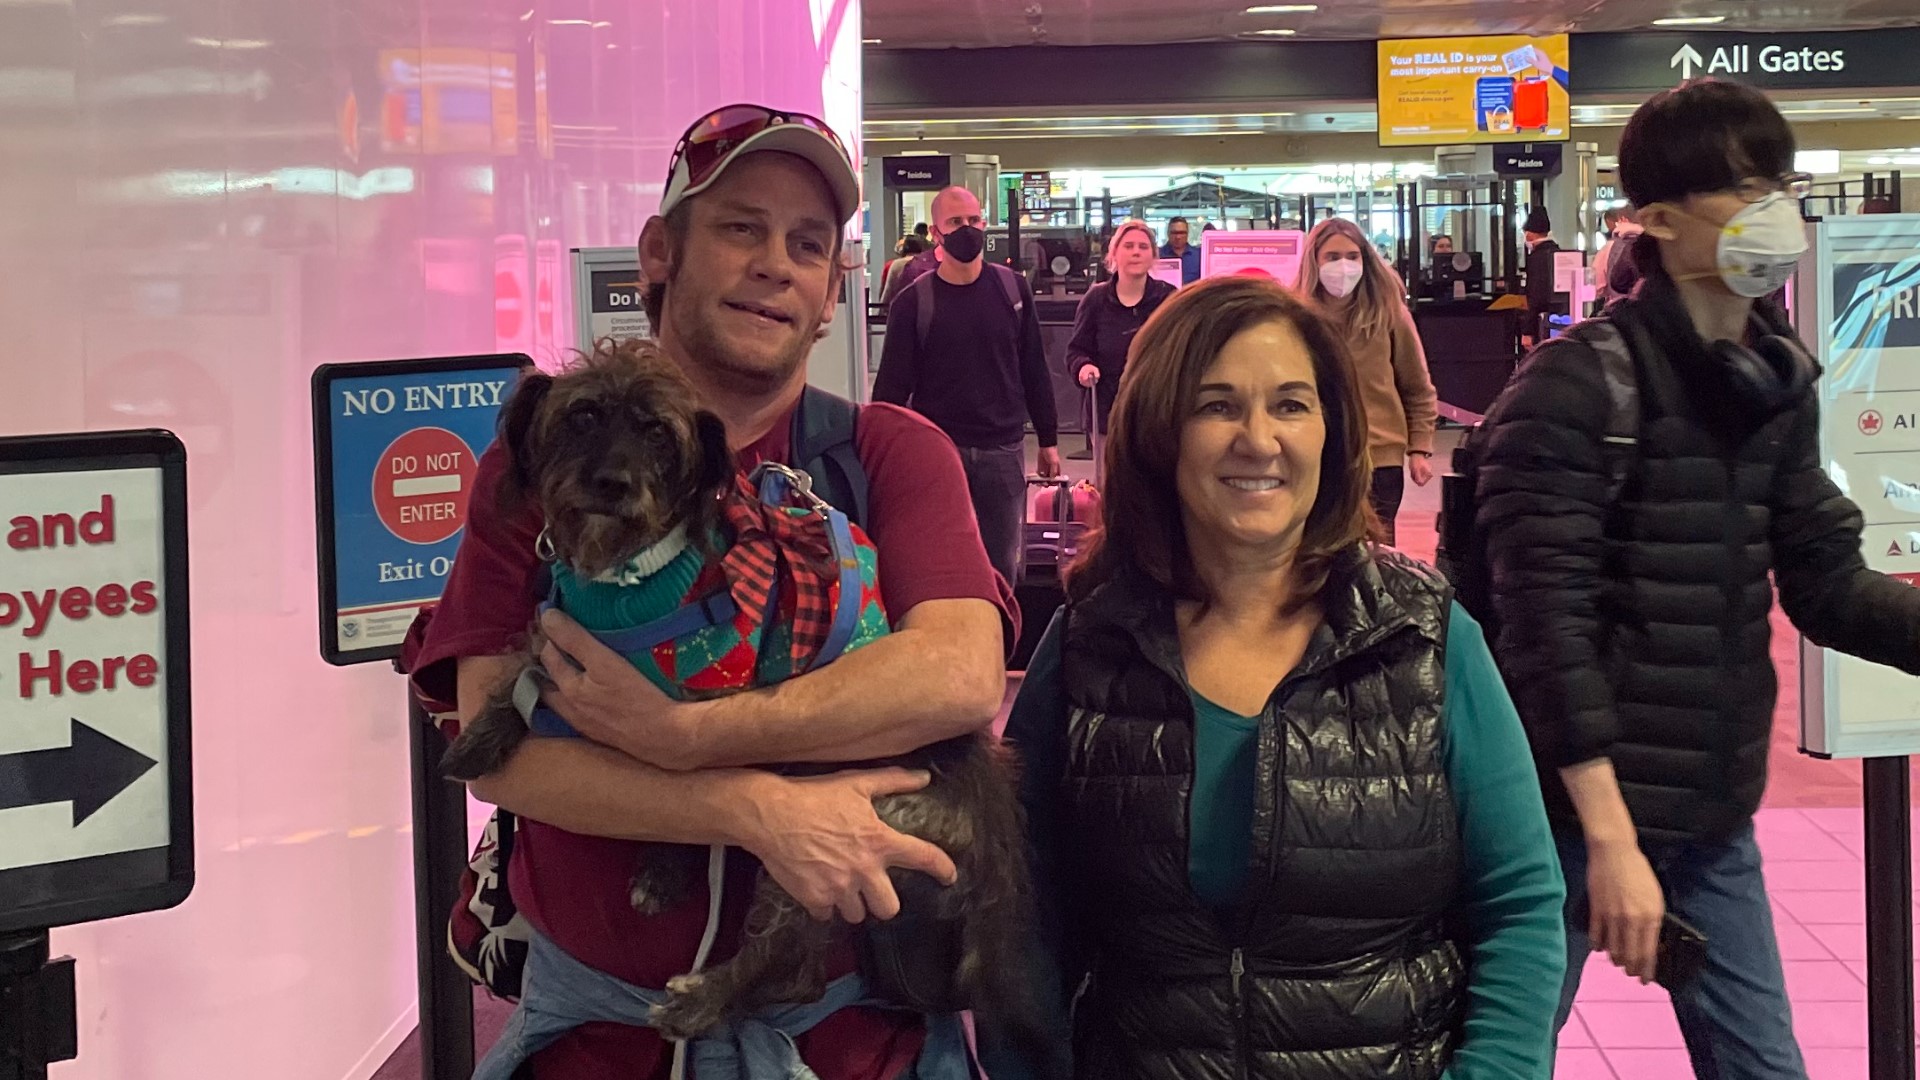 A man was reunited with his service dog today at Sacramento International Airport after seven months.